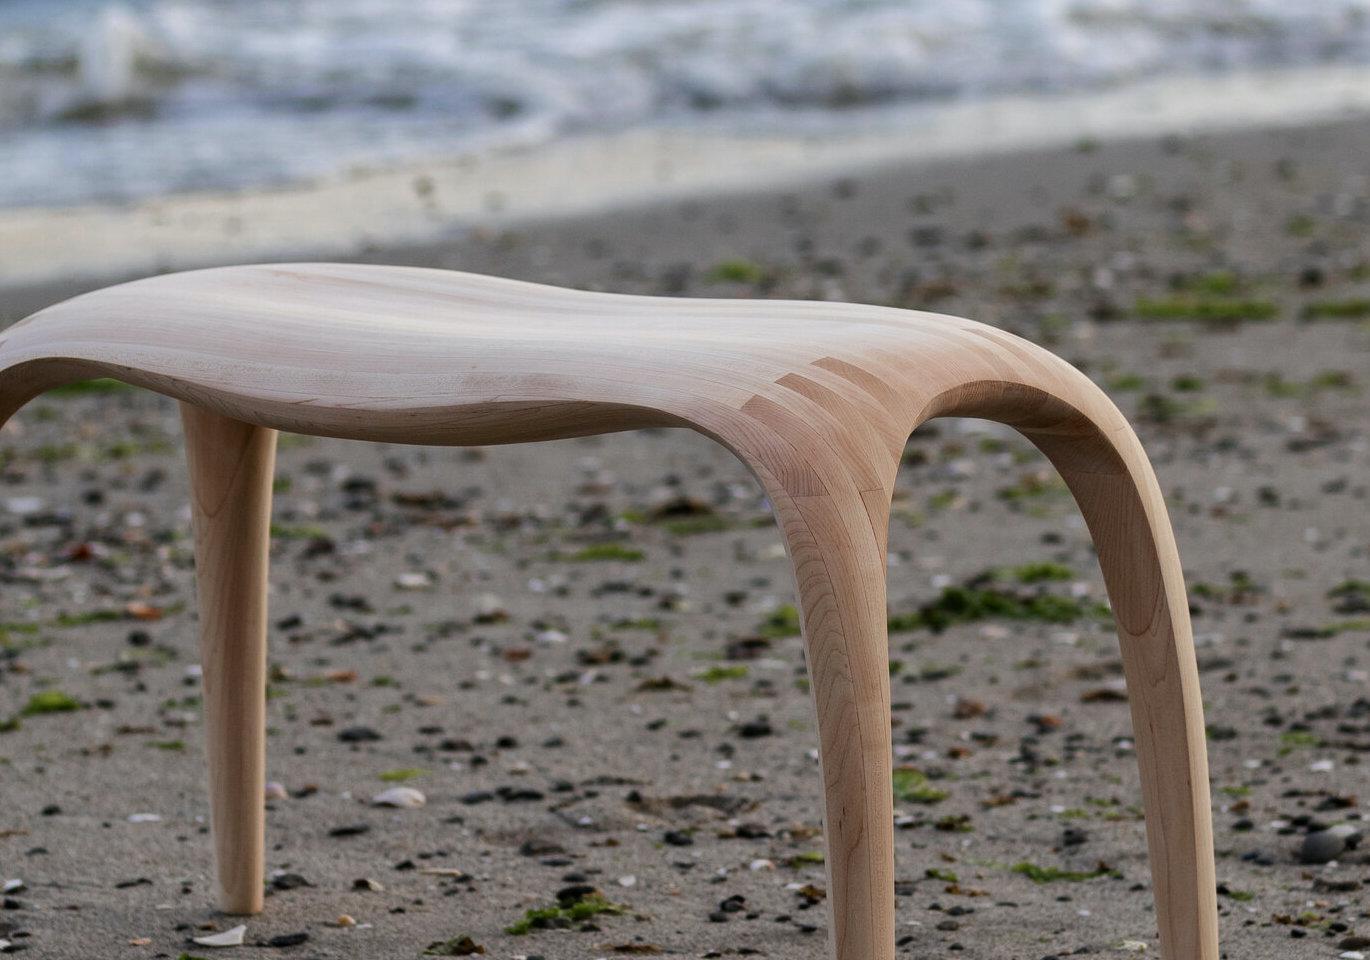 American Sculptural Bench in wood - 'Gravity Bench' by Soo Joo For Sale